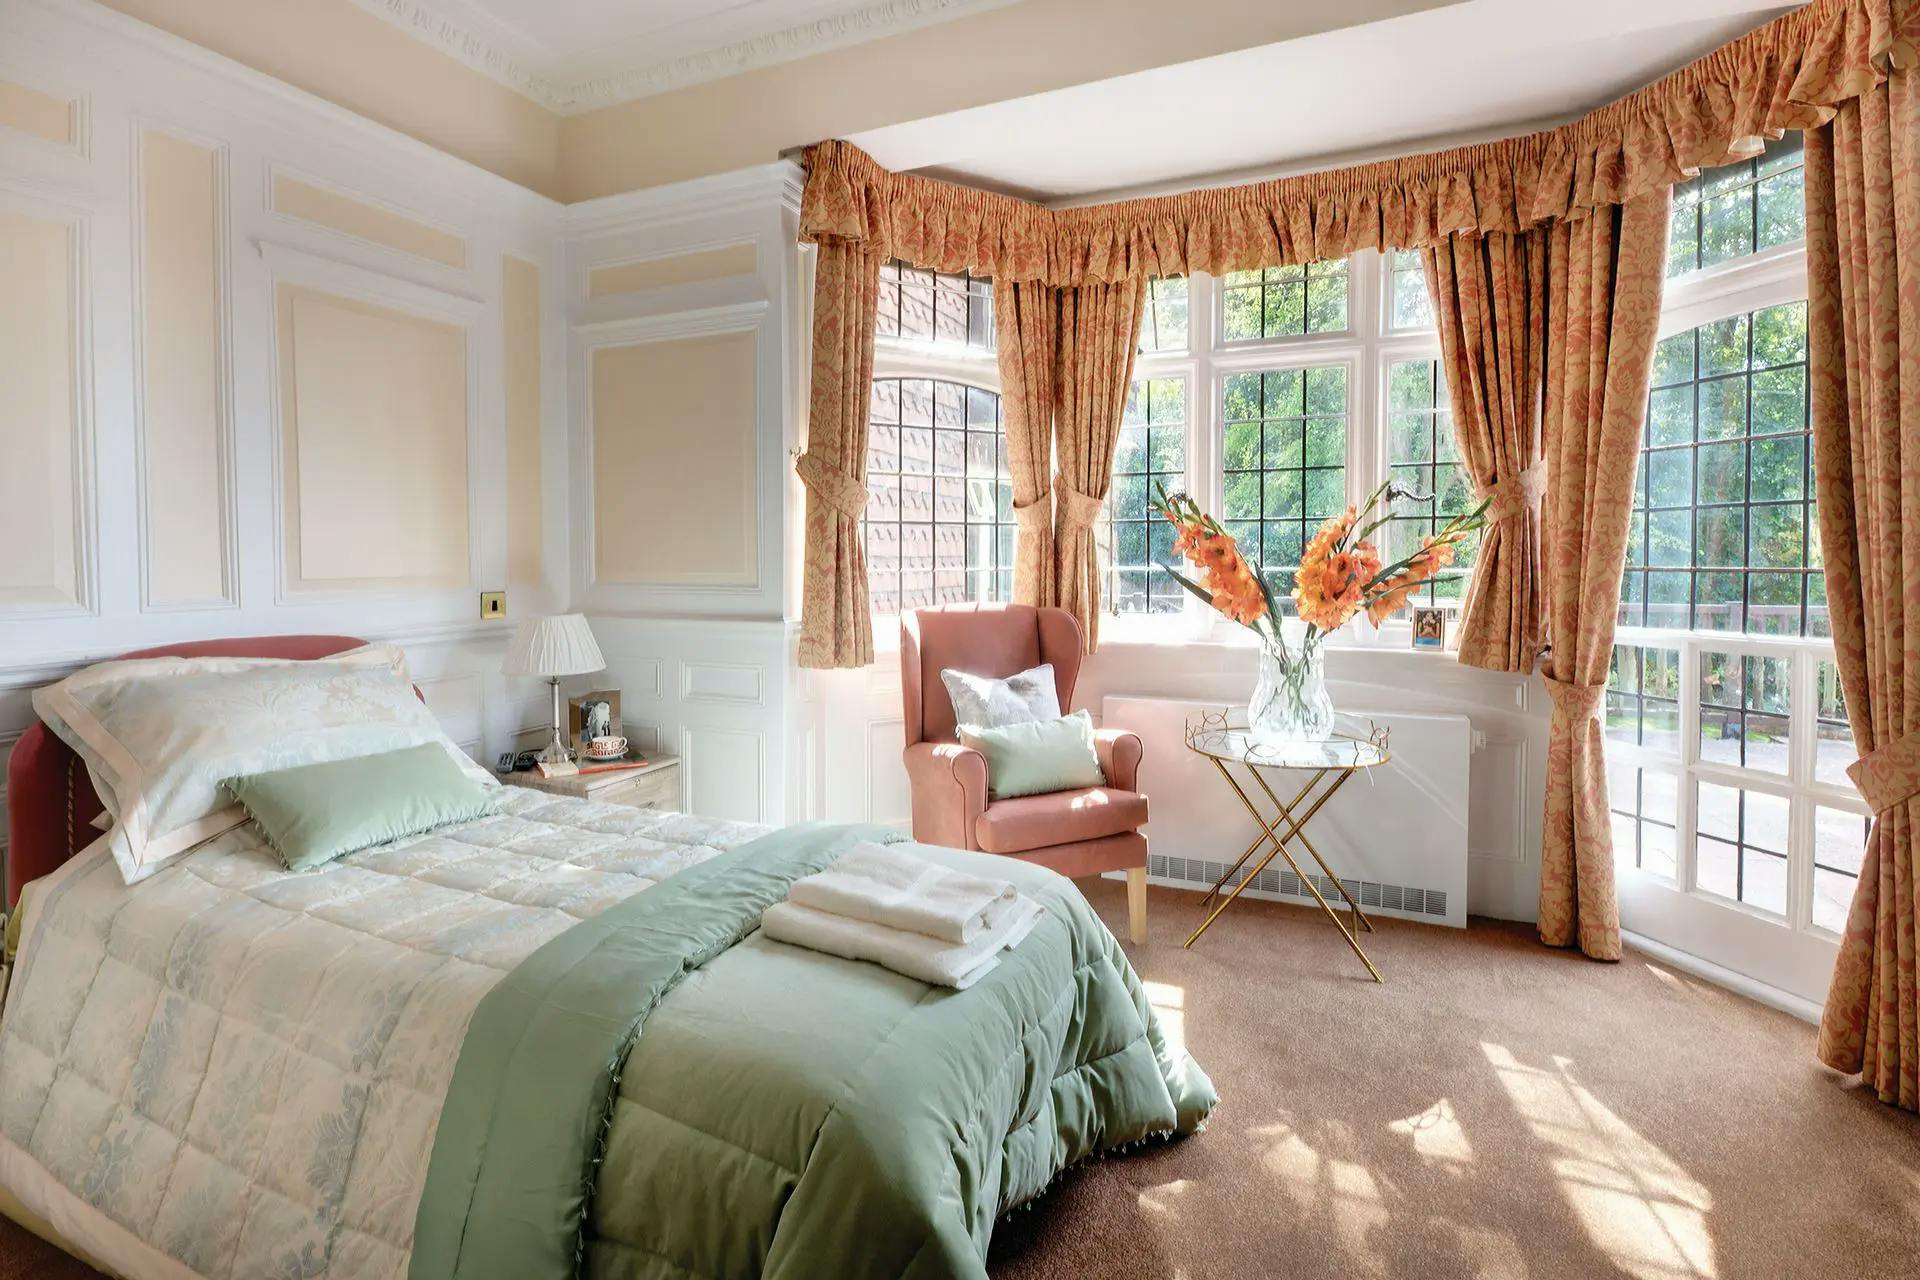 Bedroom at Garth House Care Home in Dorking, Mole Valley